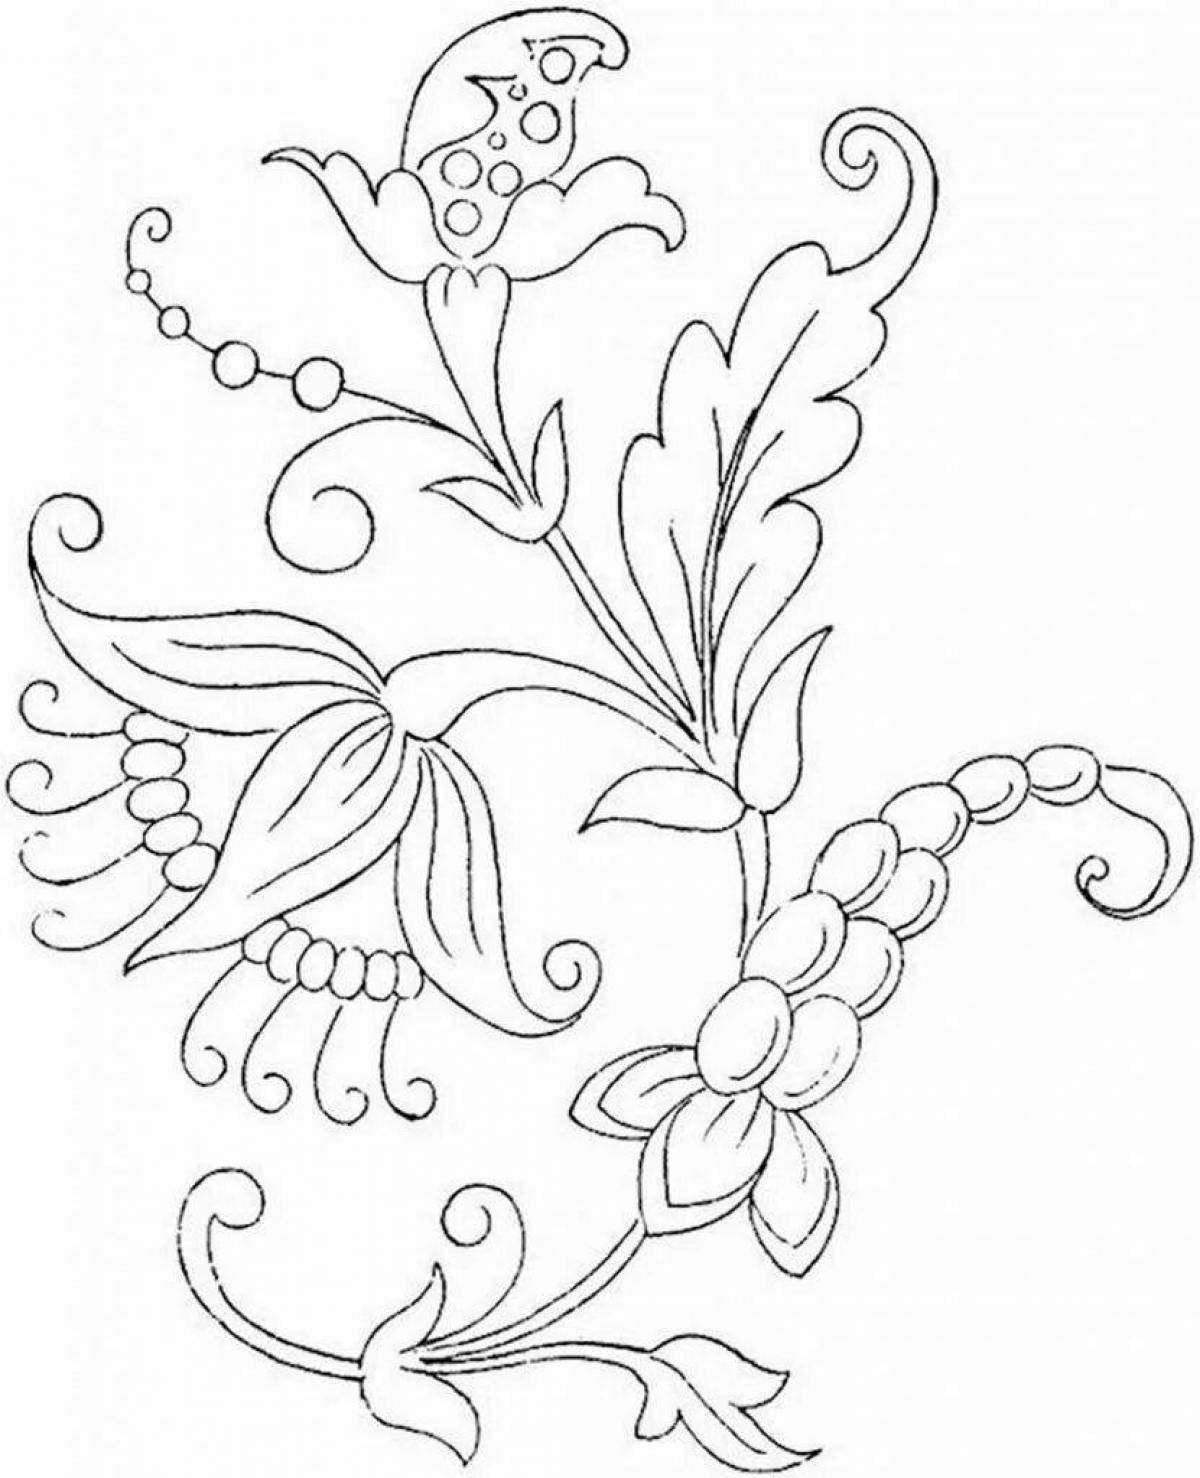 Playful russian coloring page